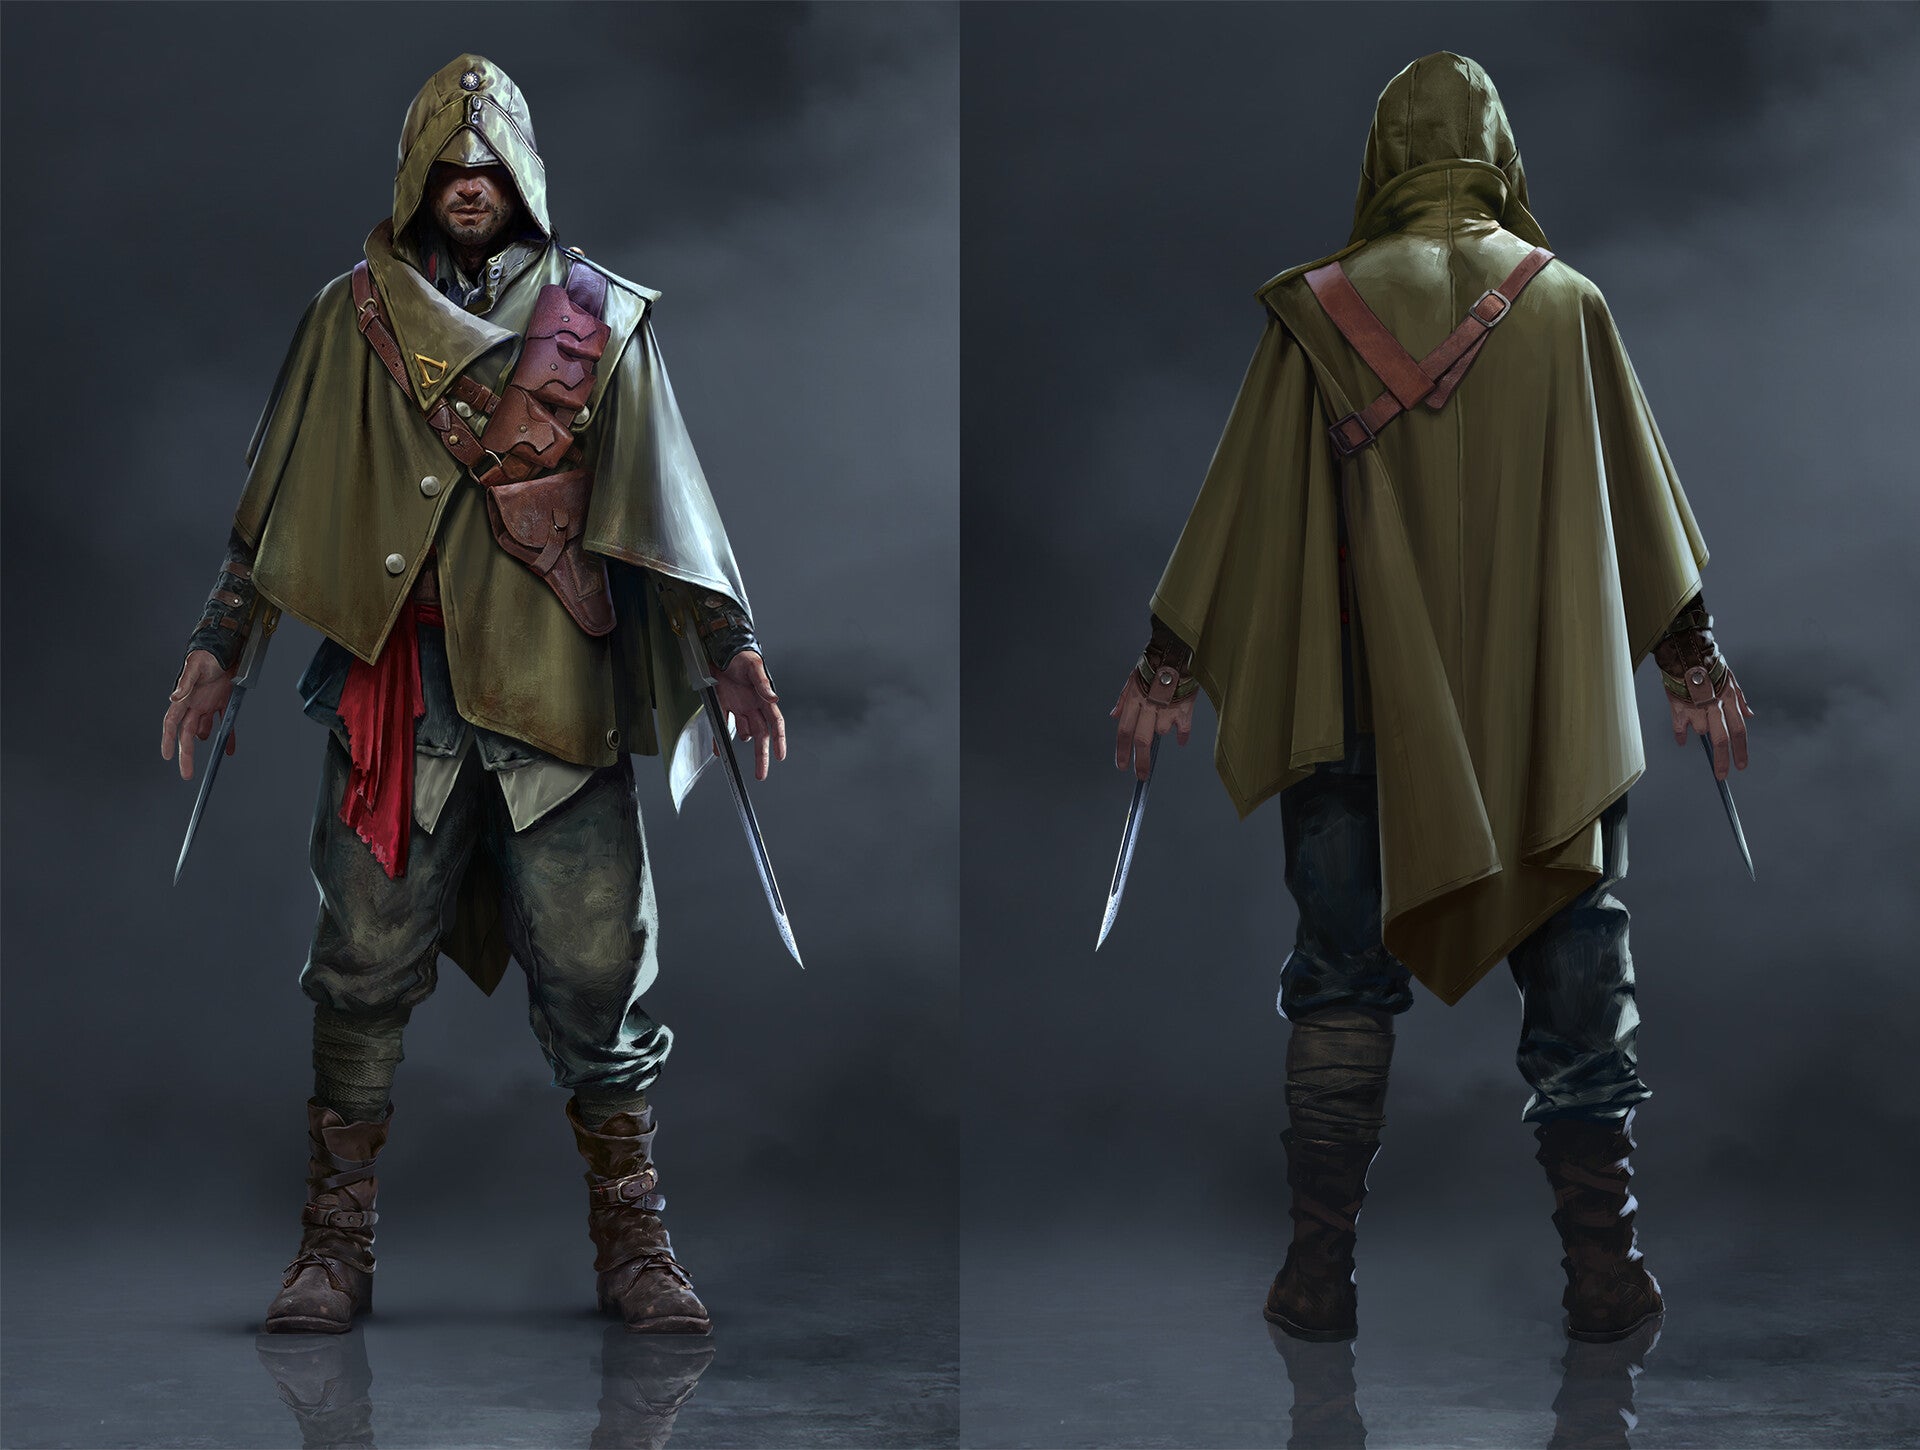 A Very Cool Idea For A New Assassin’s Creed Game